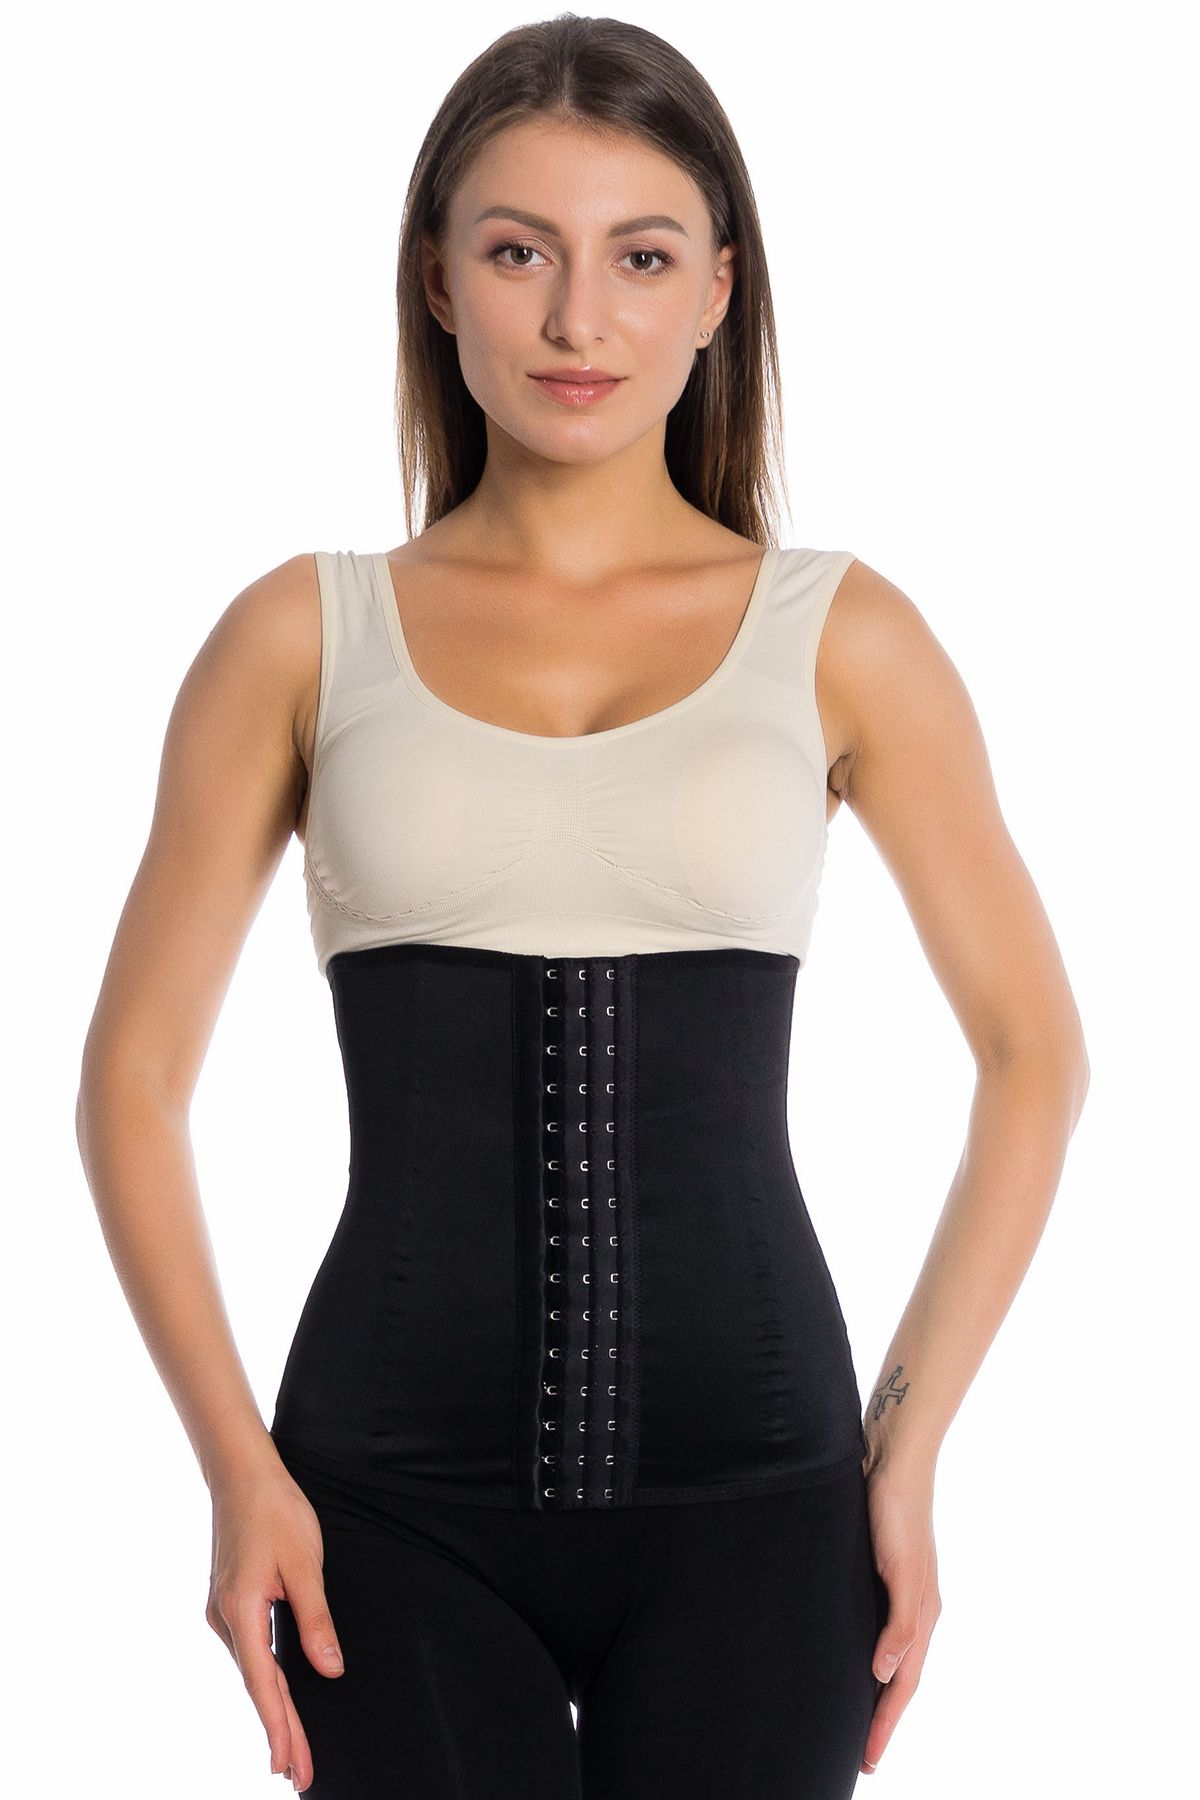 ELEGANCE KORSE Waist Supporting Slimming and Firming Latex Postpartum Latex  Corset Waist and Belly Corset - Trendyol